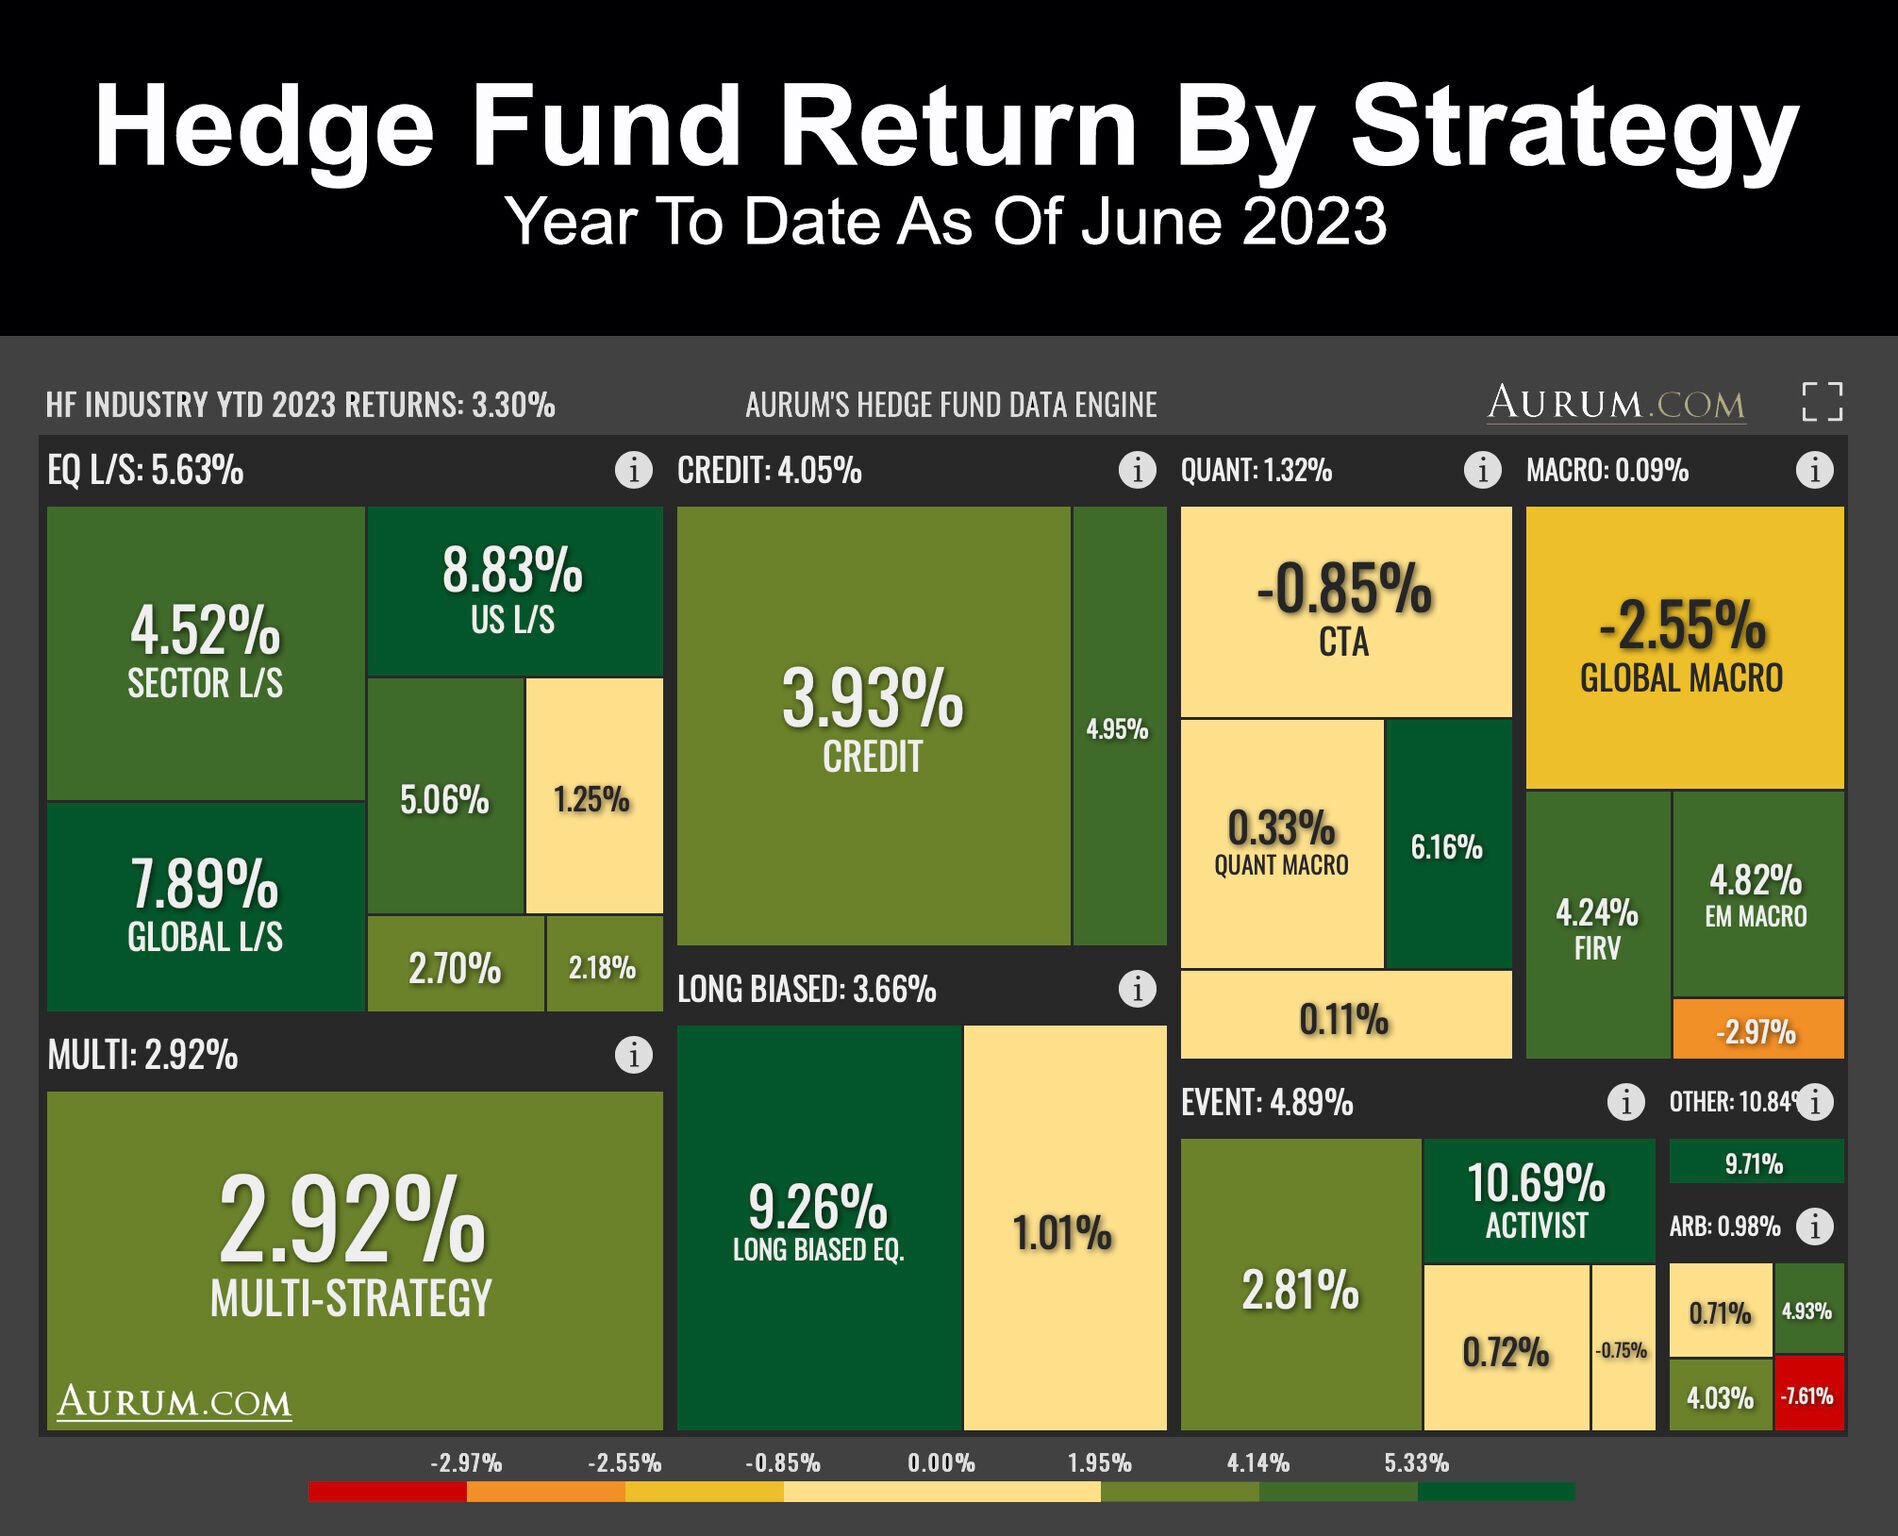 Hedge Funds YTD returns by strategy as of June 30th